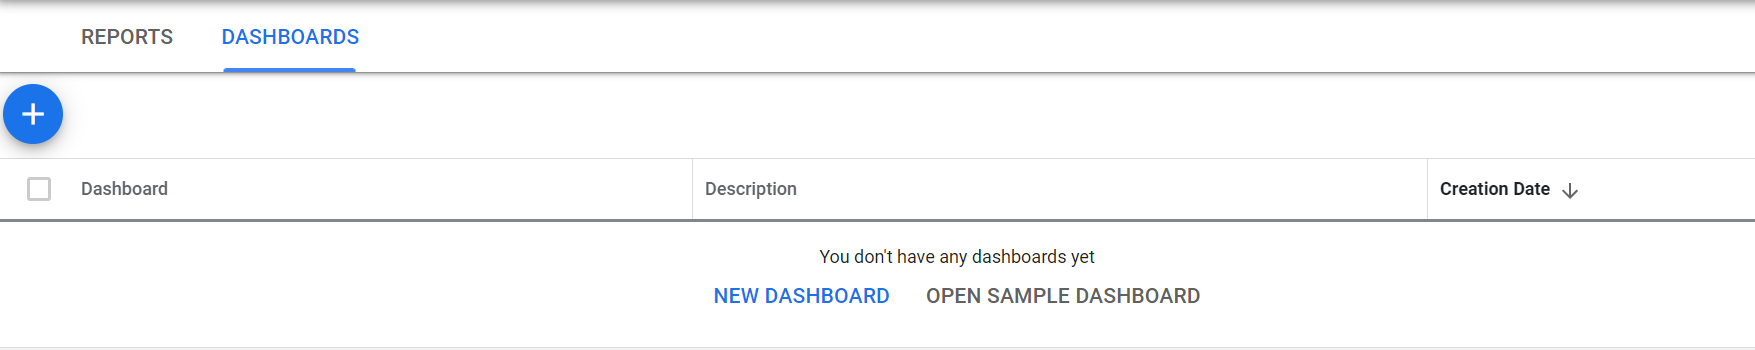 Homepage of MCC-level dashboards created in Google Ads.